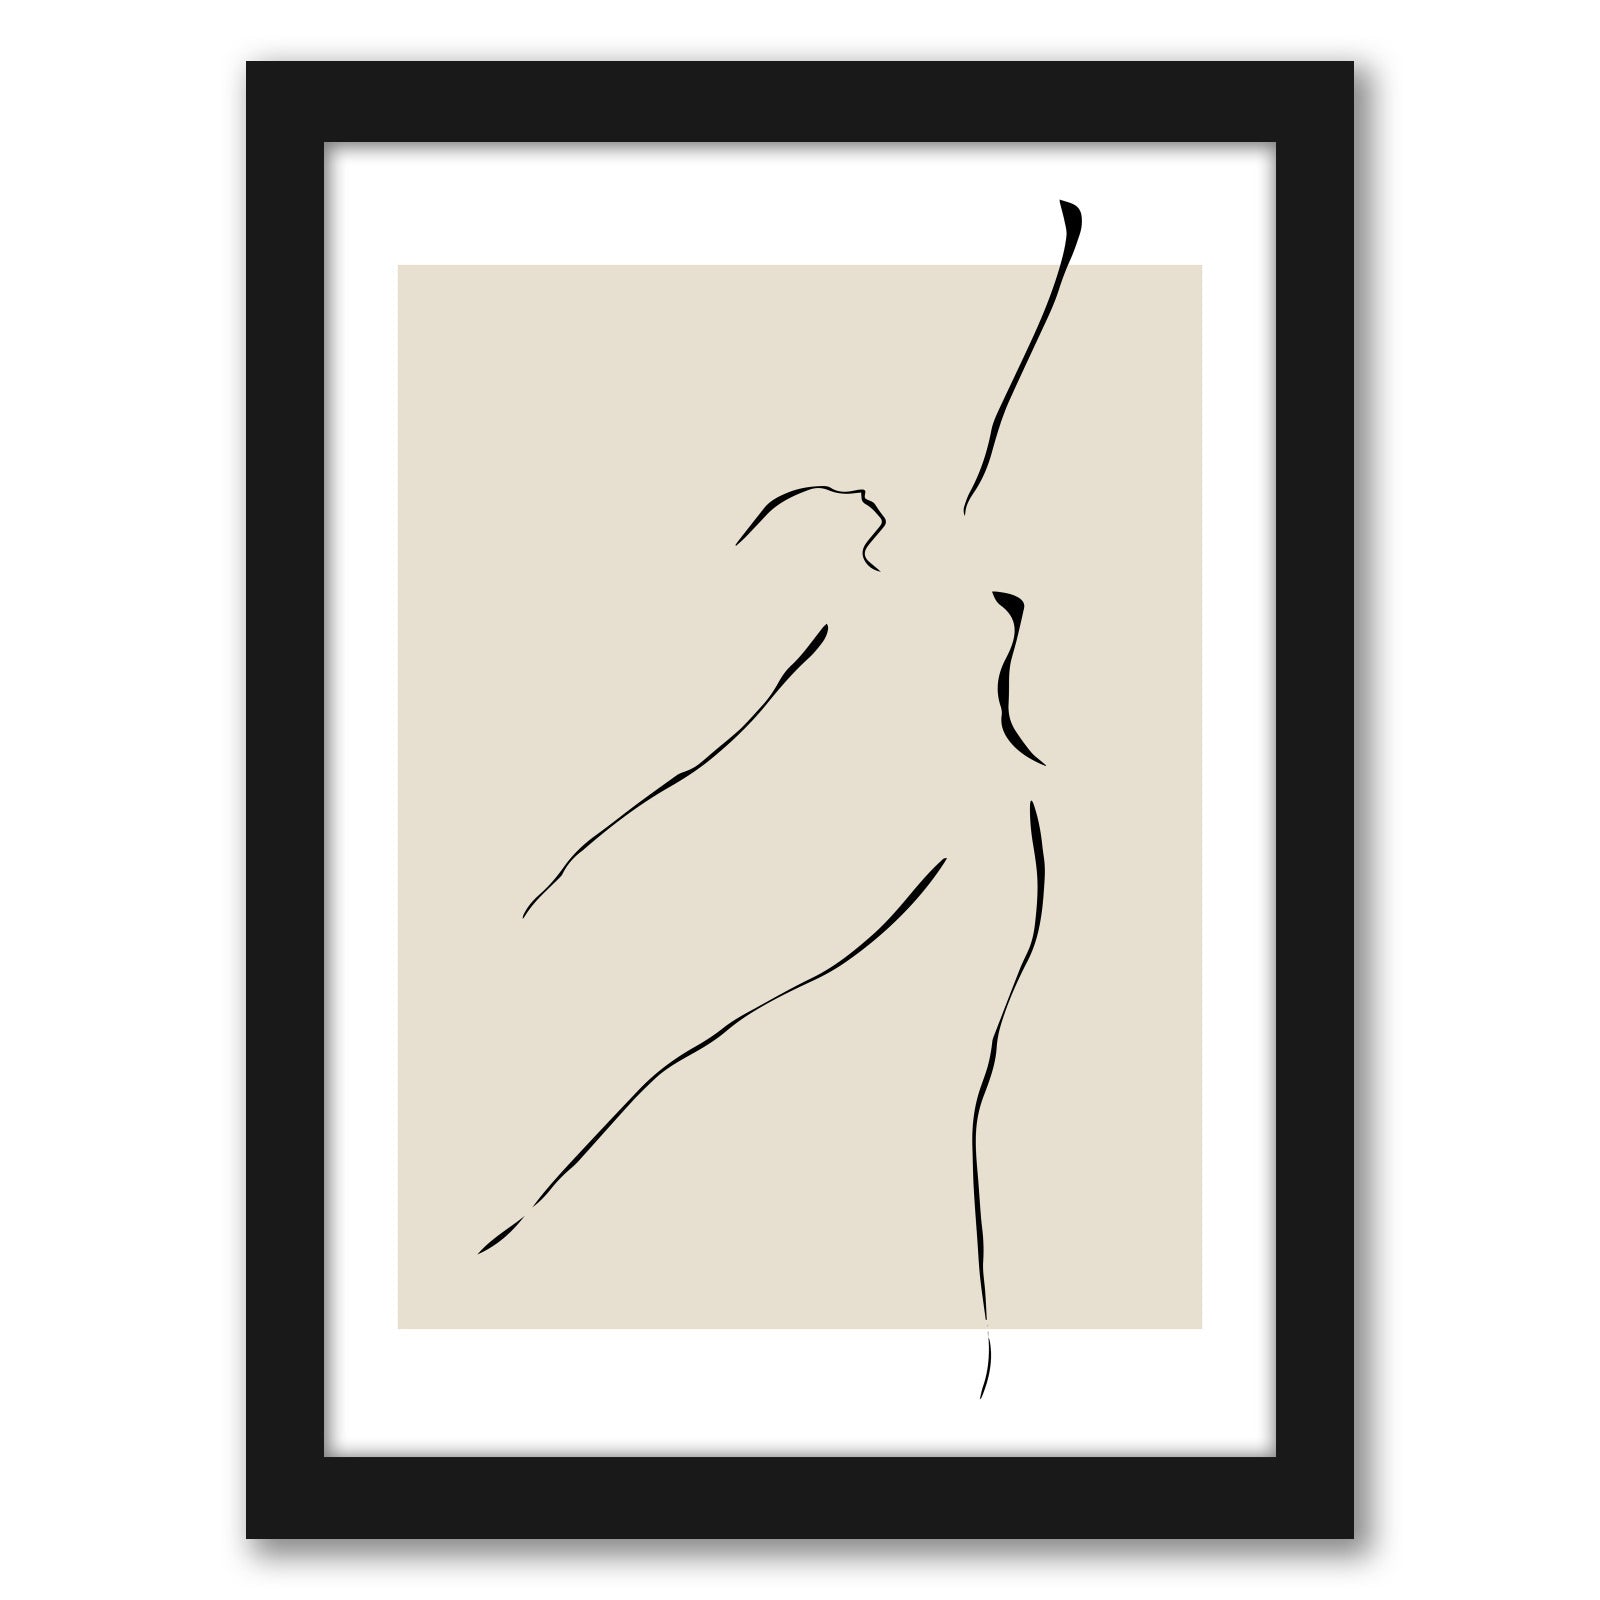 Ballerina Line Art by Thomas Succes - Canvas, Poster or Framed Print